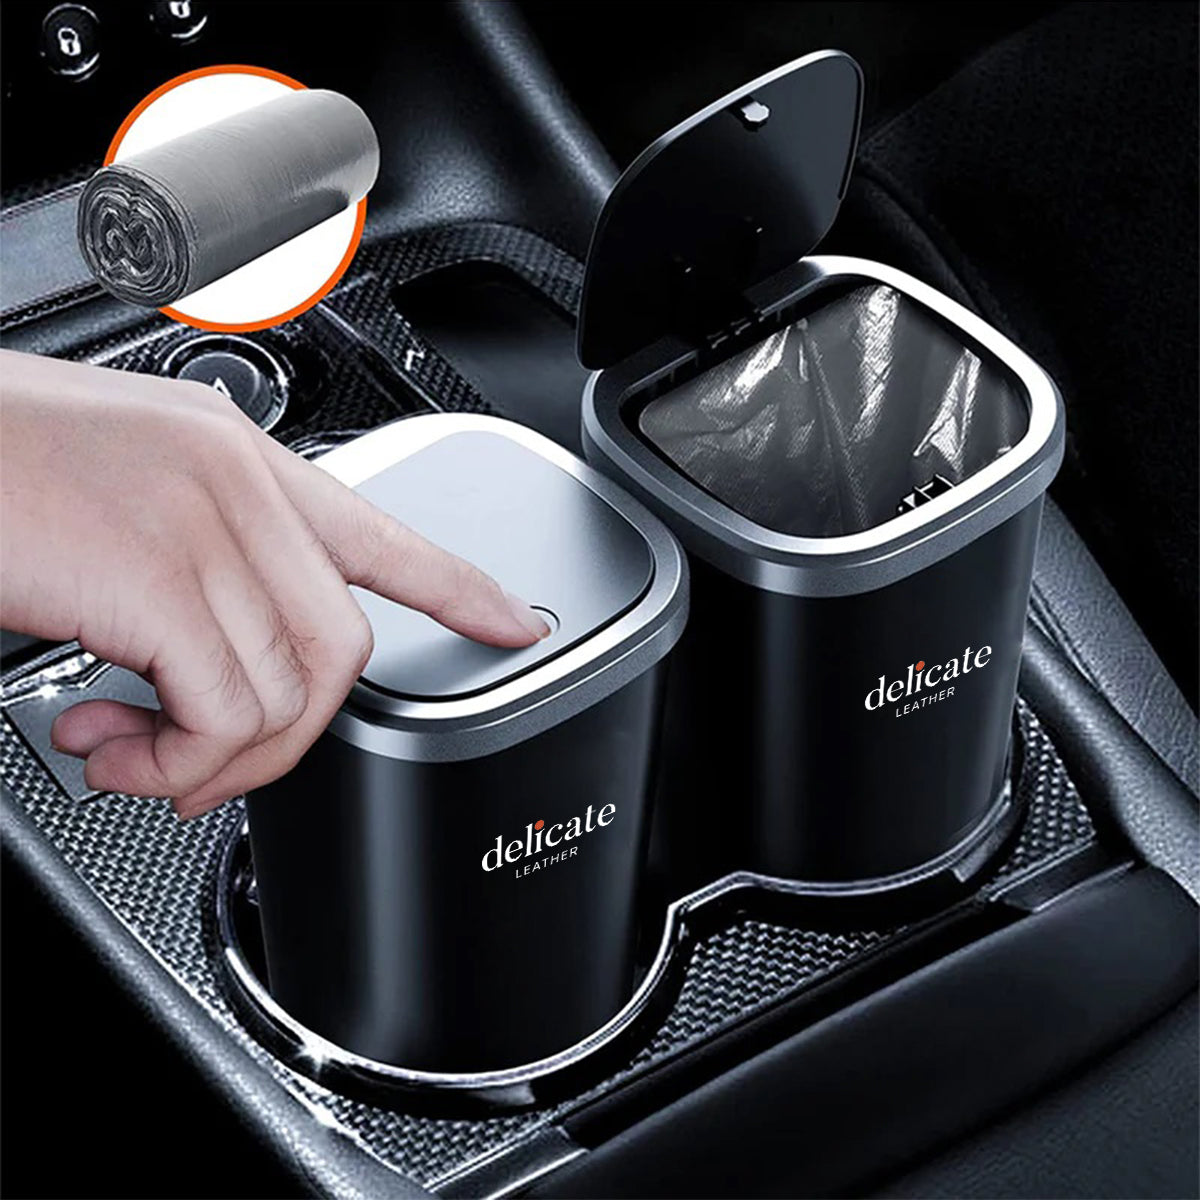 Car Trash Cans, Custom For Your Cars, Compact & Durable Car Accessories for Interior Use 2 Pack, Practical Car Organizers and Storage Cups with Pop-Up Open, Car Accessories TS11993 - Delicate Leather